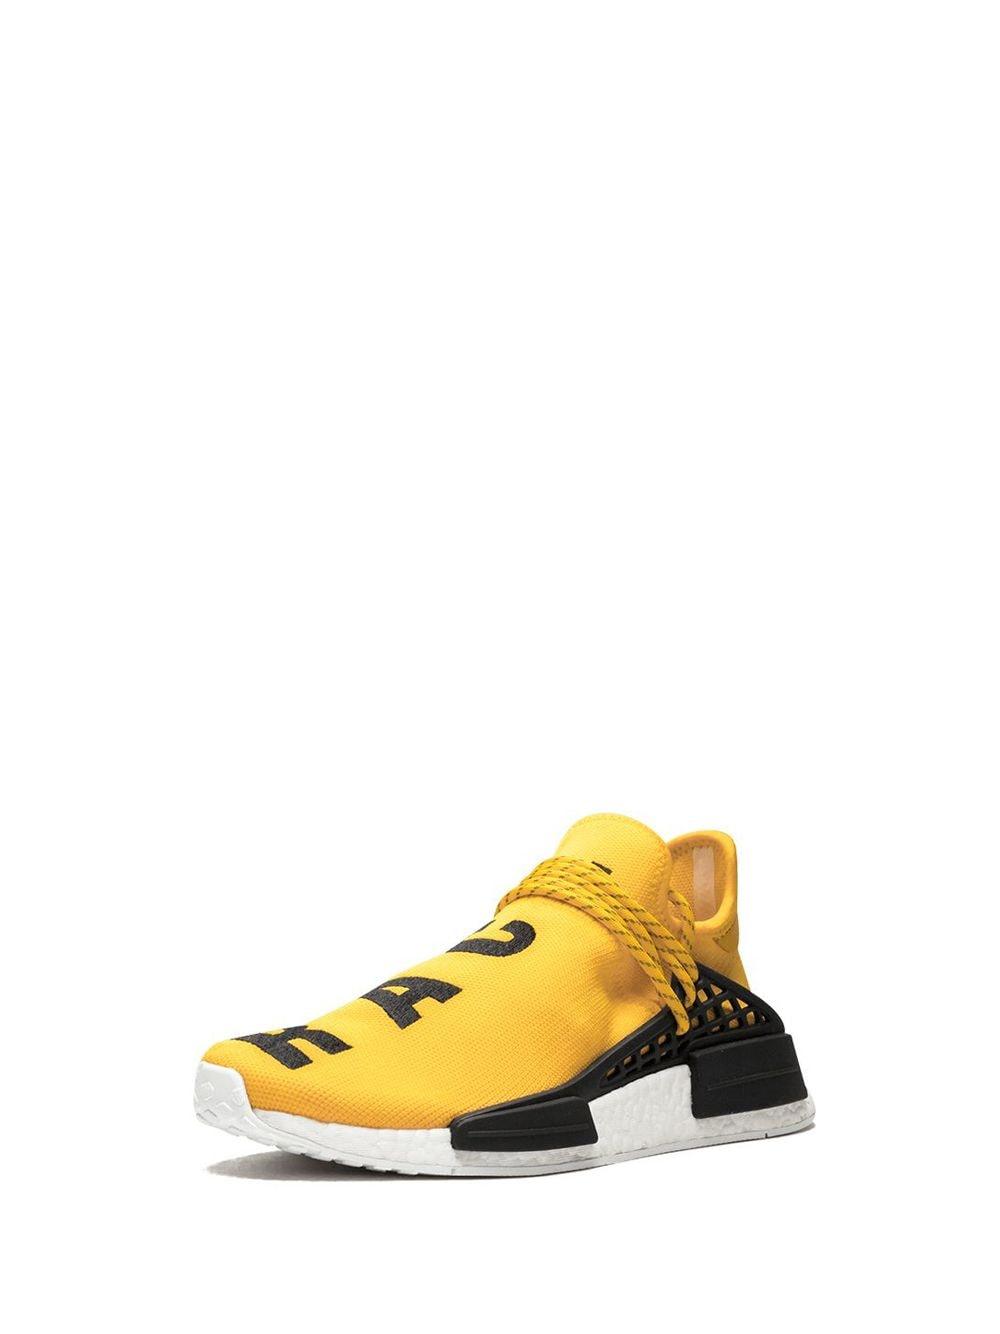 Adidas Pw Human Race Nmd Pharrell Shoes In Yellow For Men Lyst